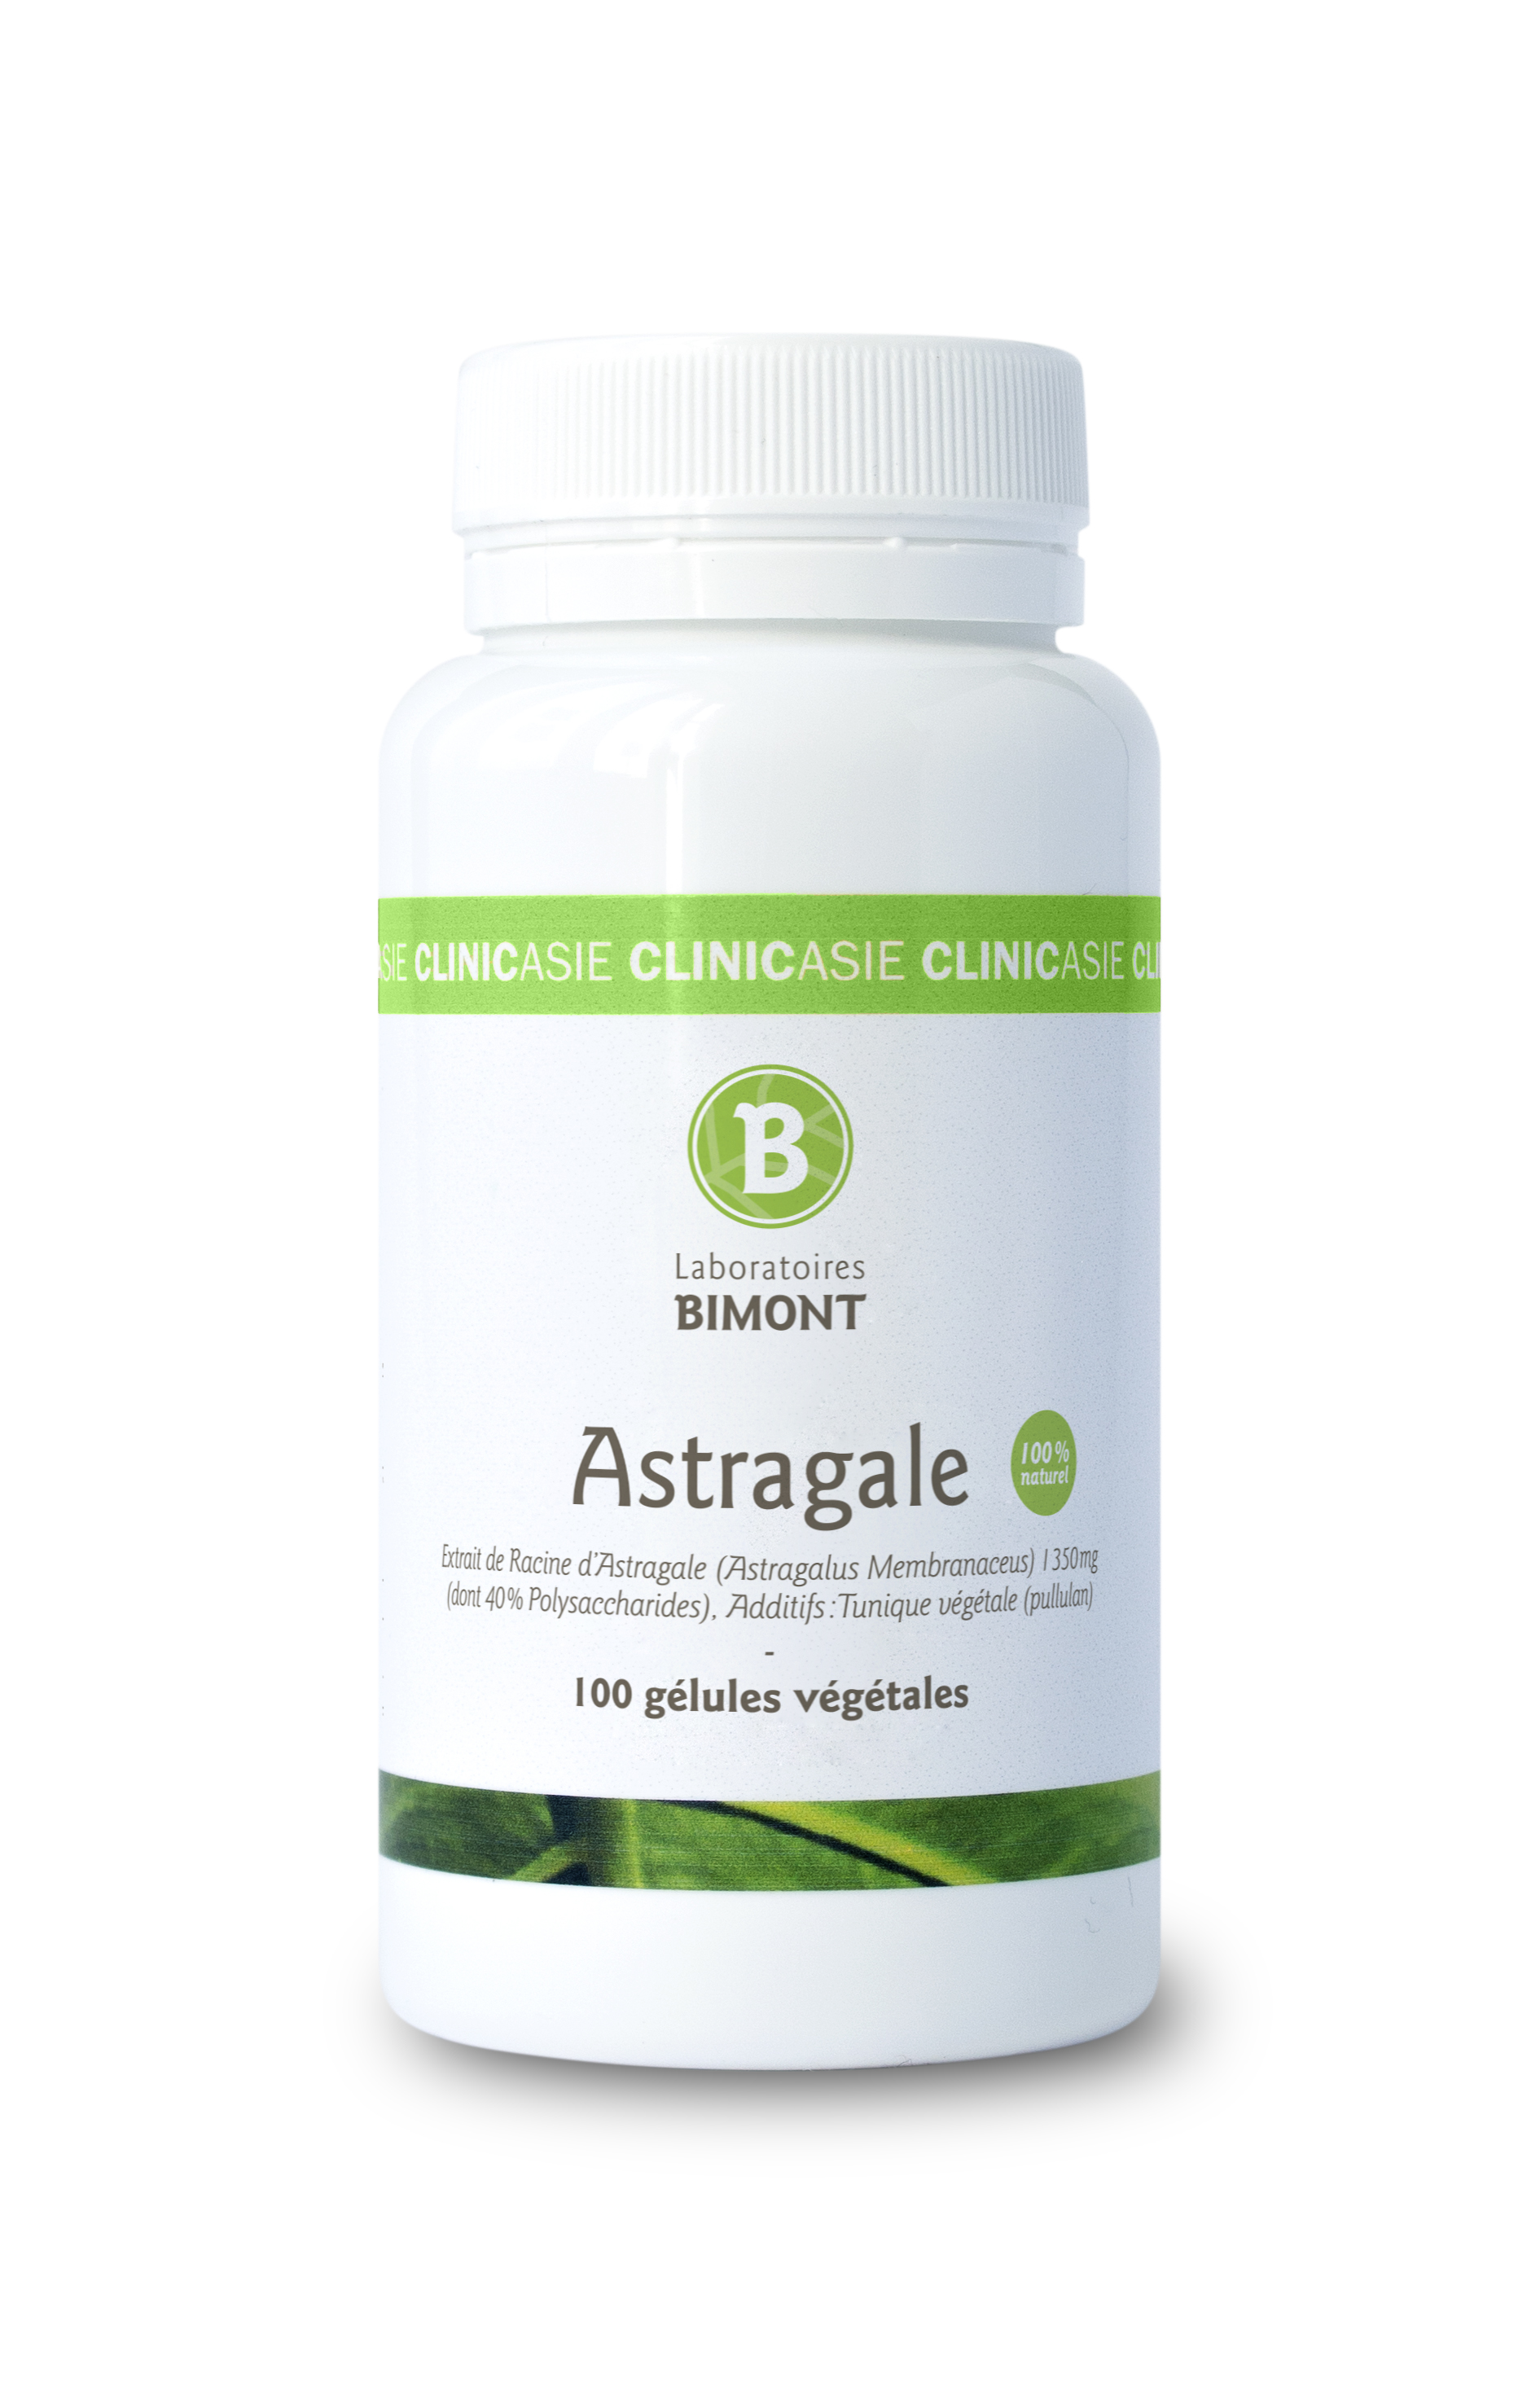 Astragale pharmacopée chinoise Bimont